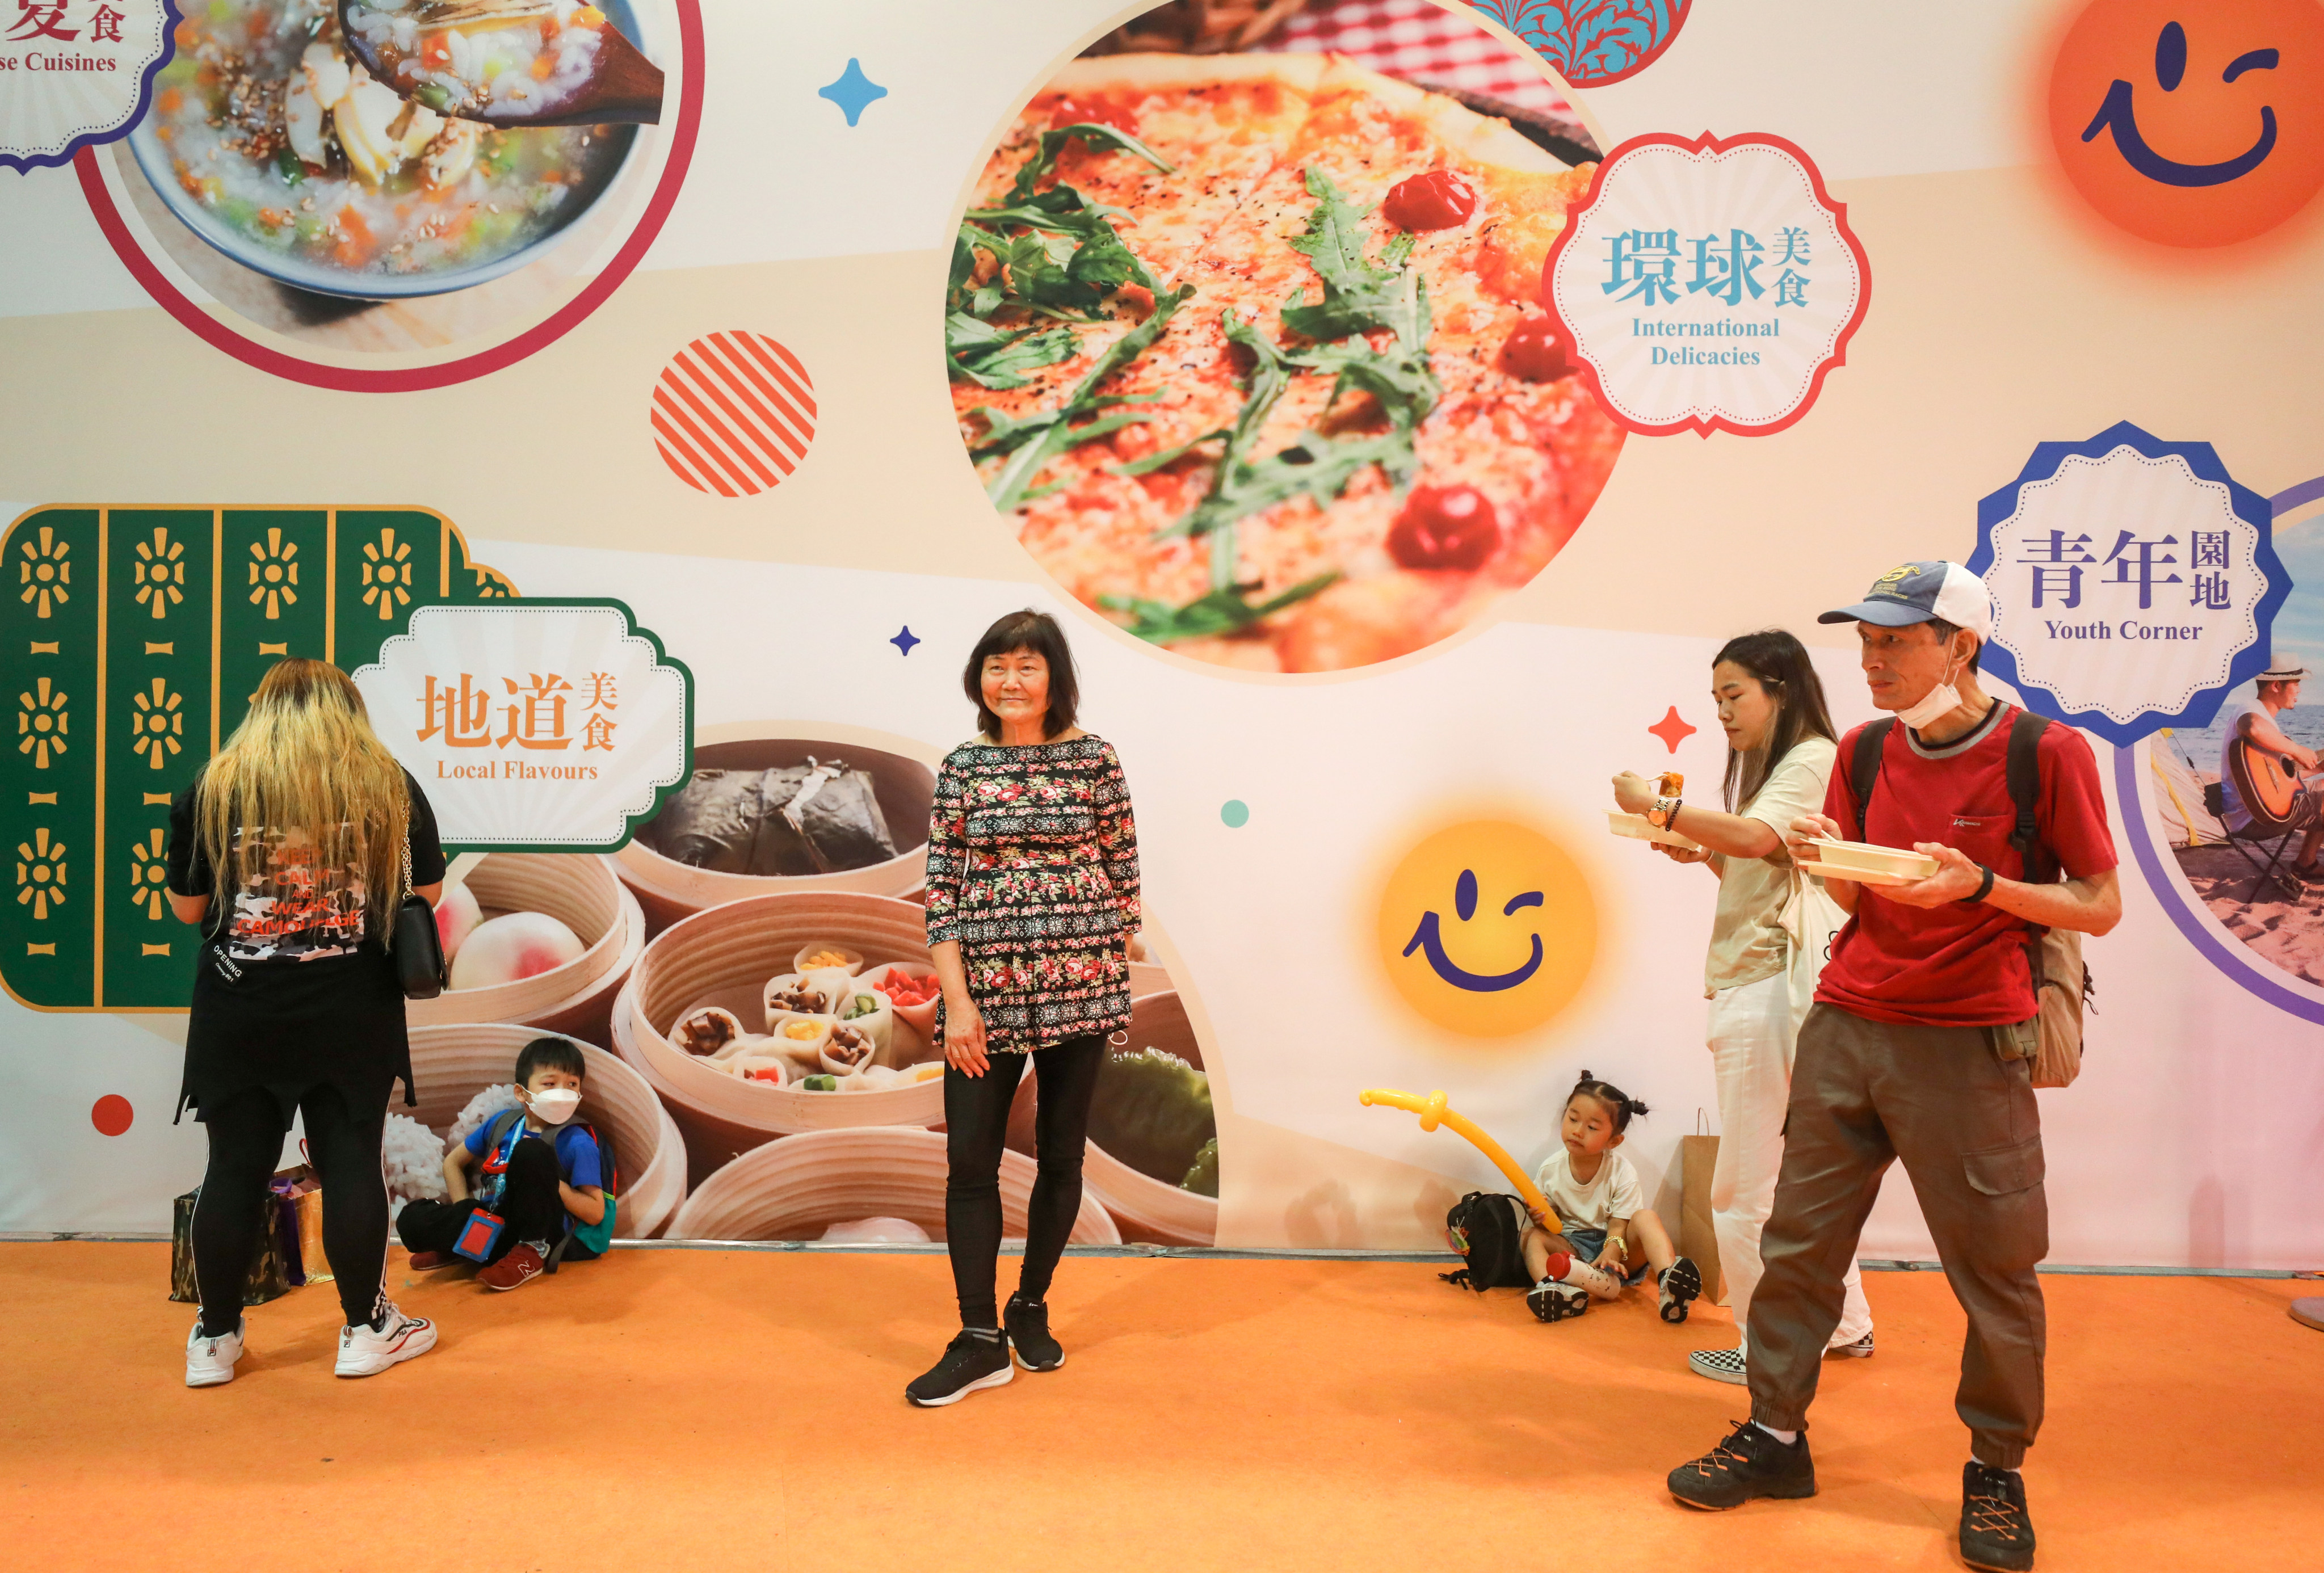 Visitors attended the “Happy Hong Kong” Gourmet Marketplace food fair for free bites and gourmet food at a discount. Photo: SCMP